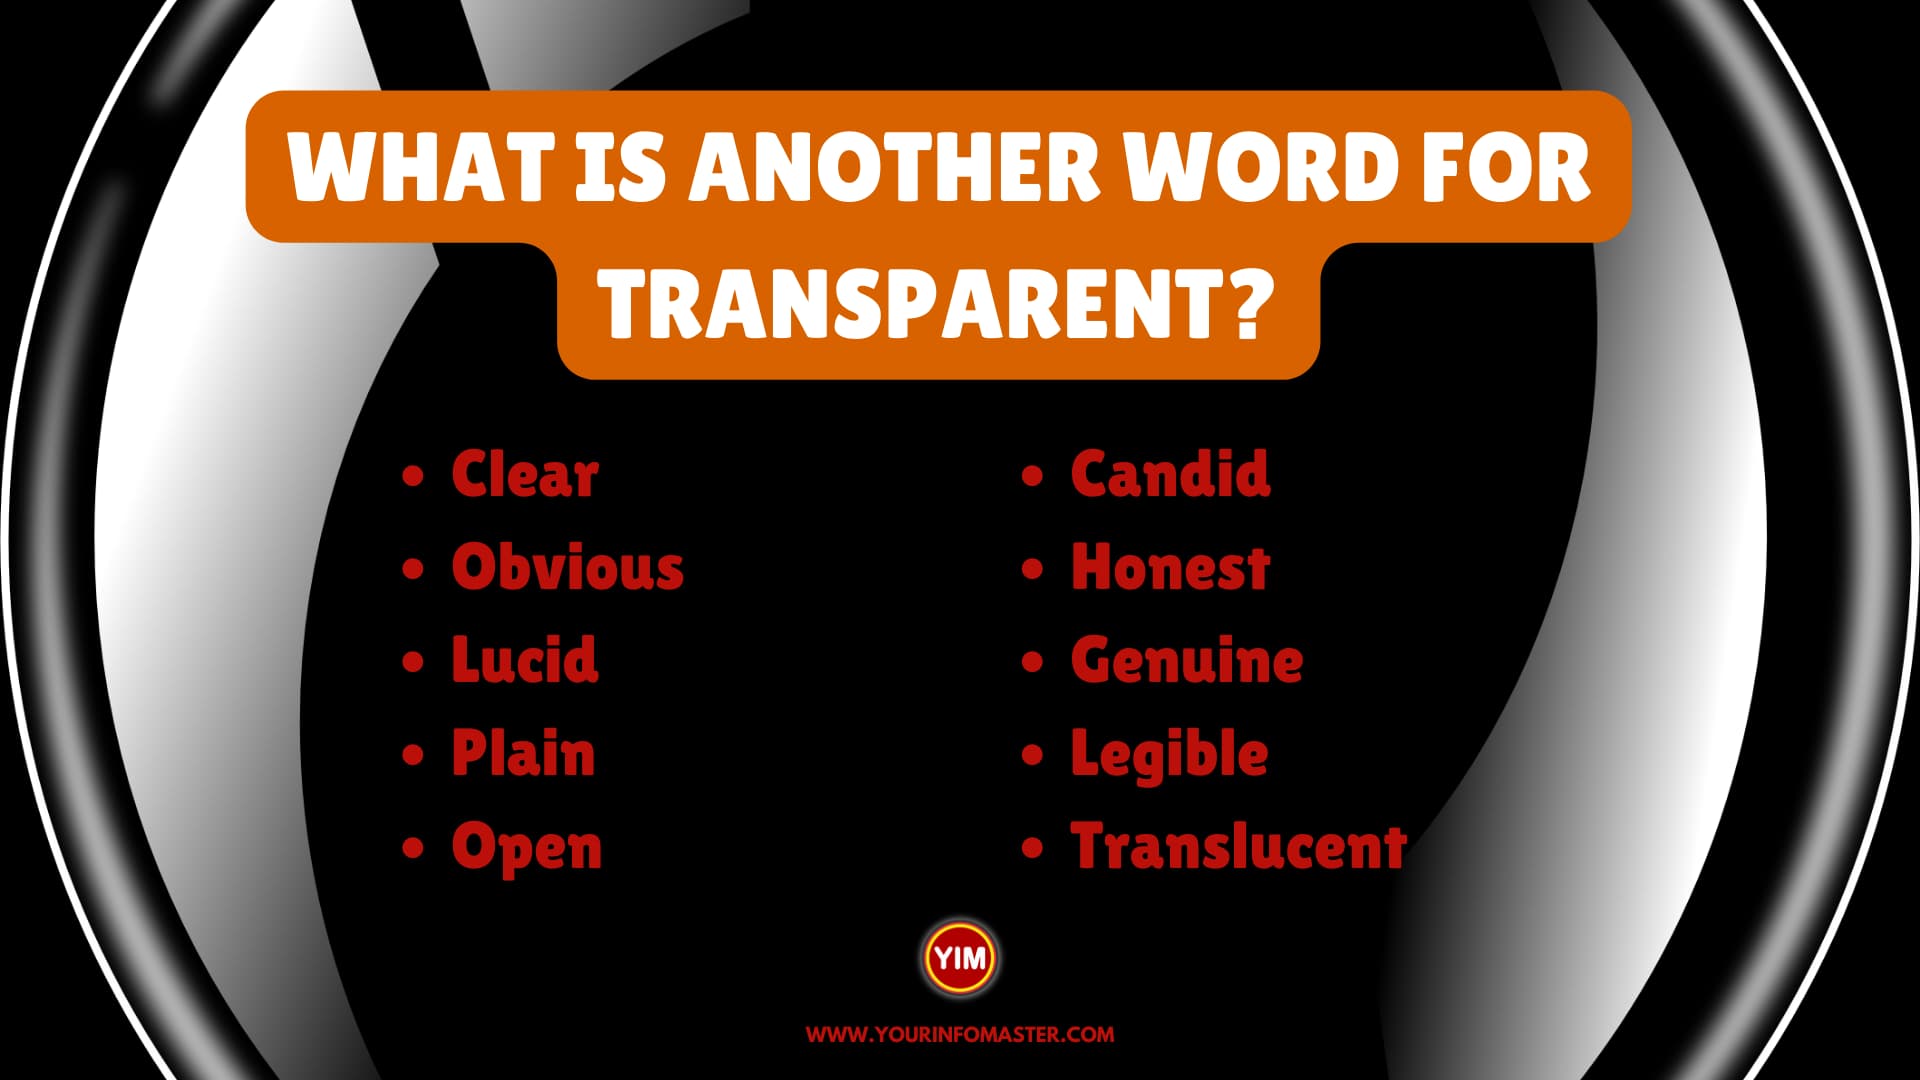 What is another word for Transparent